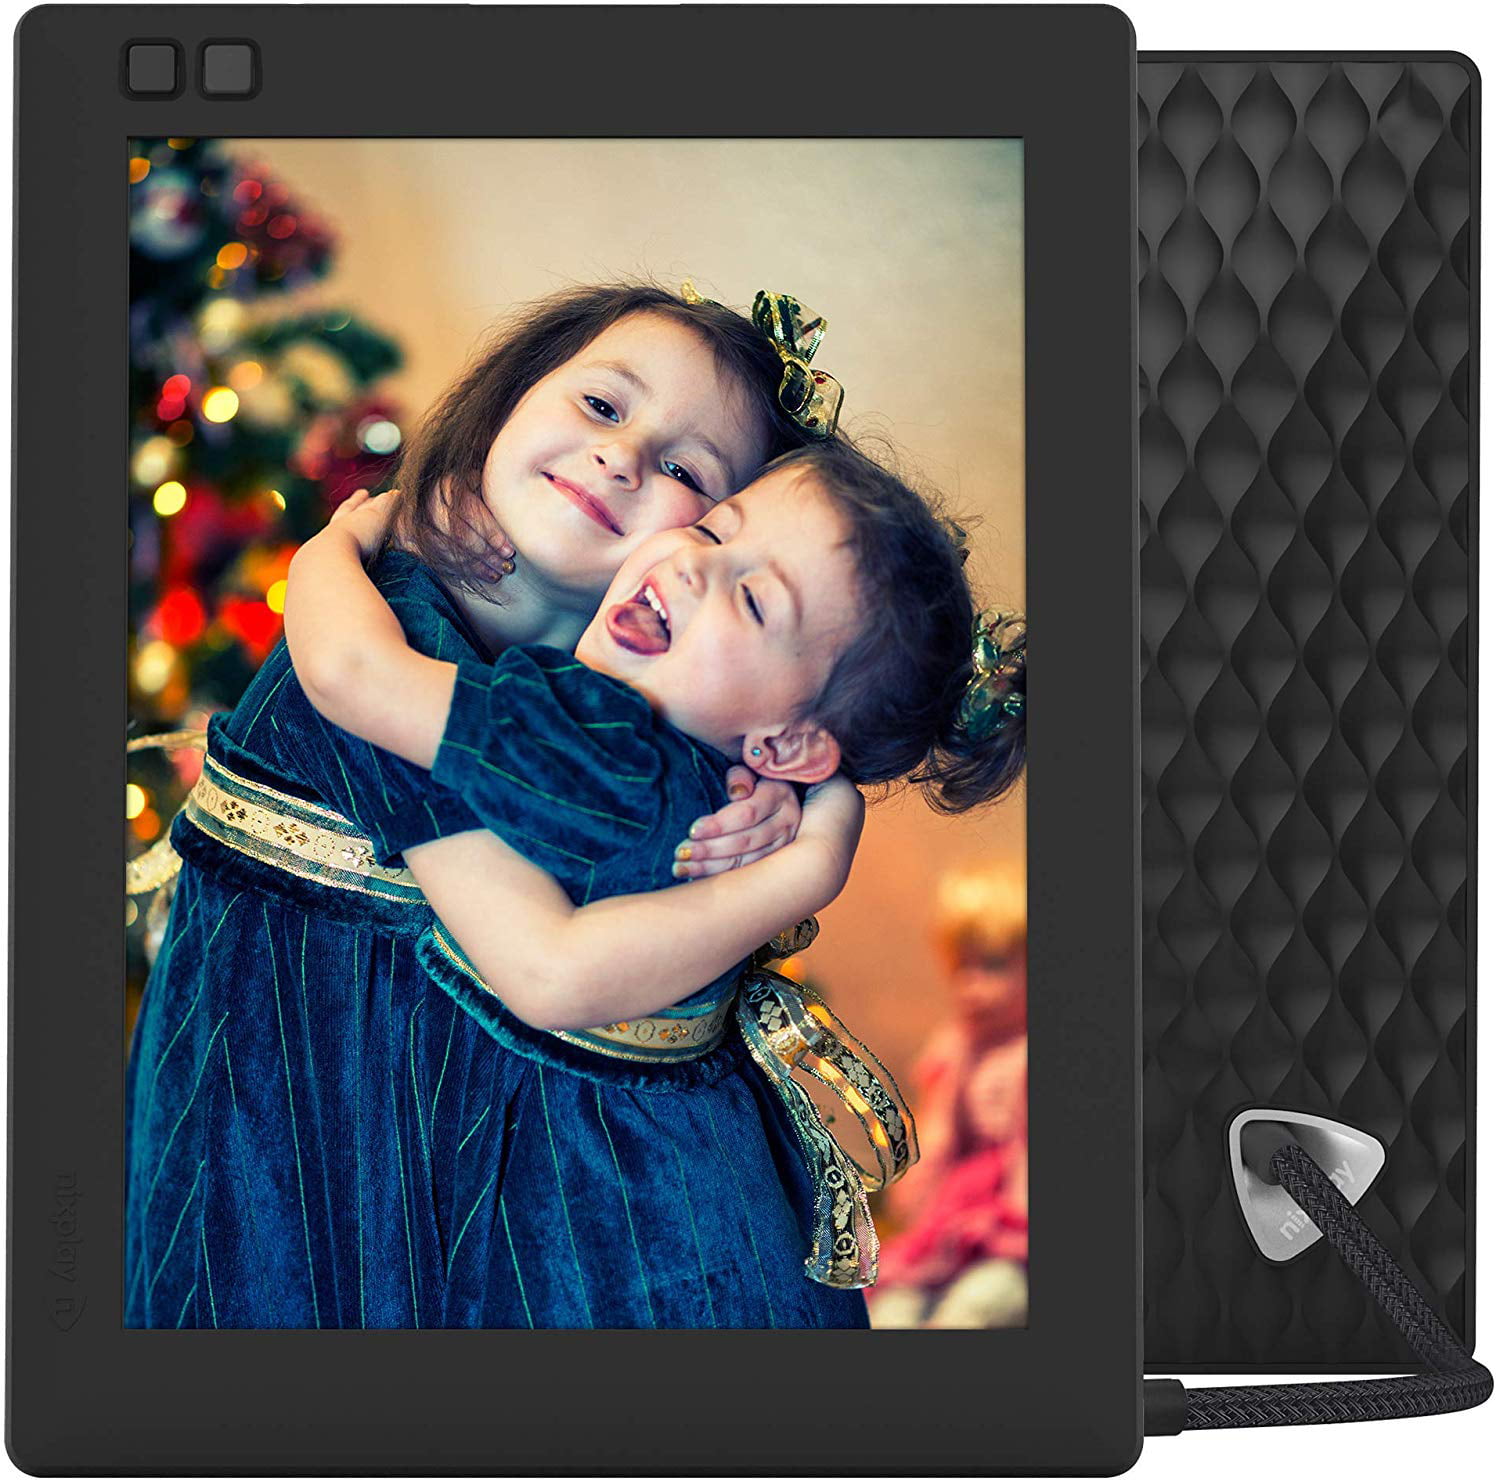 Nixplay Seed 10 Inch WiFi Digital Picture Frame Share Moments Instantly via App or E-Mail